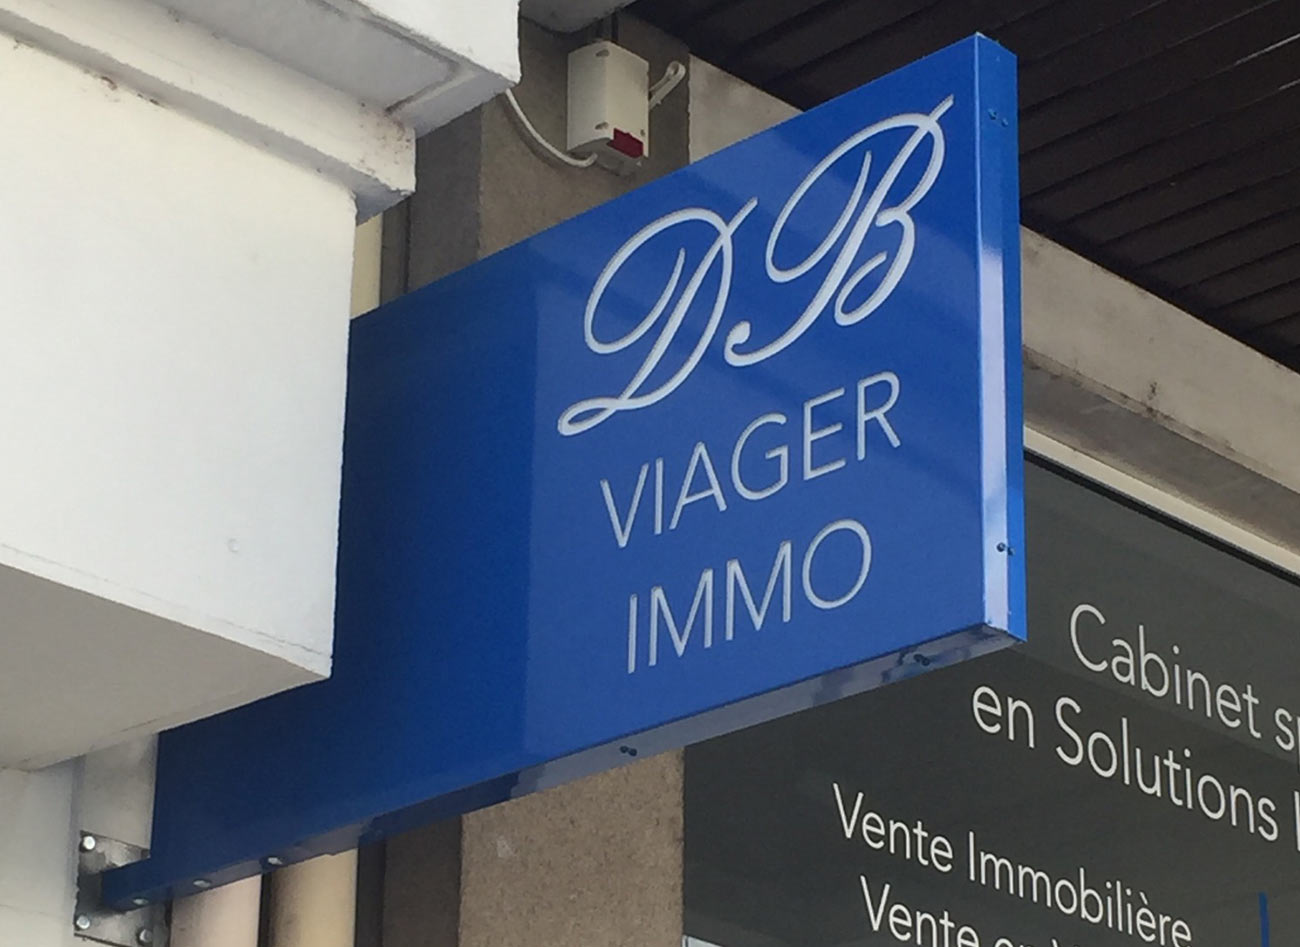 VIAGER IMMO